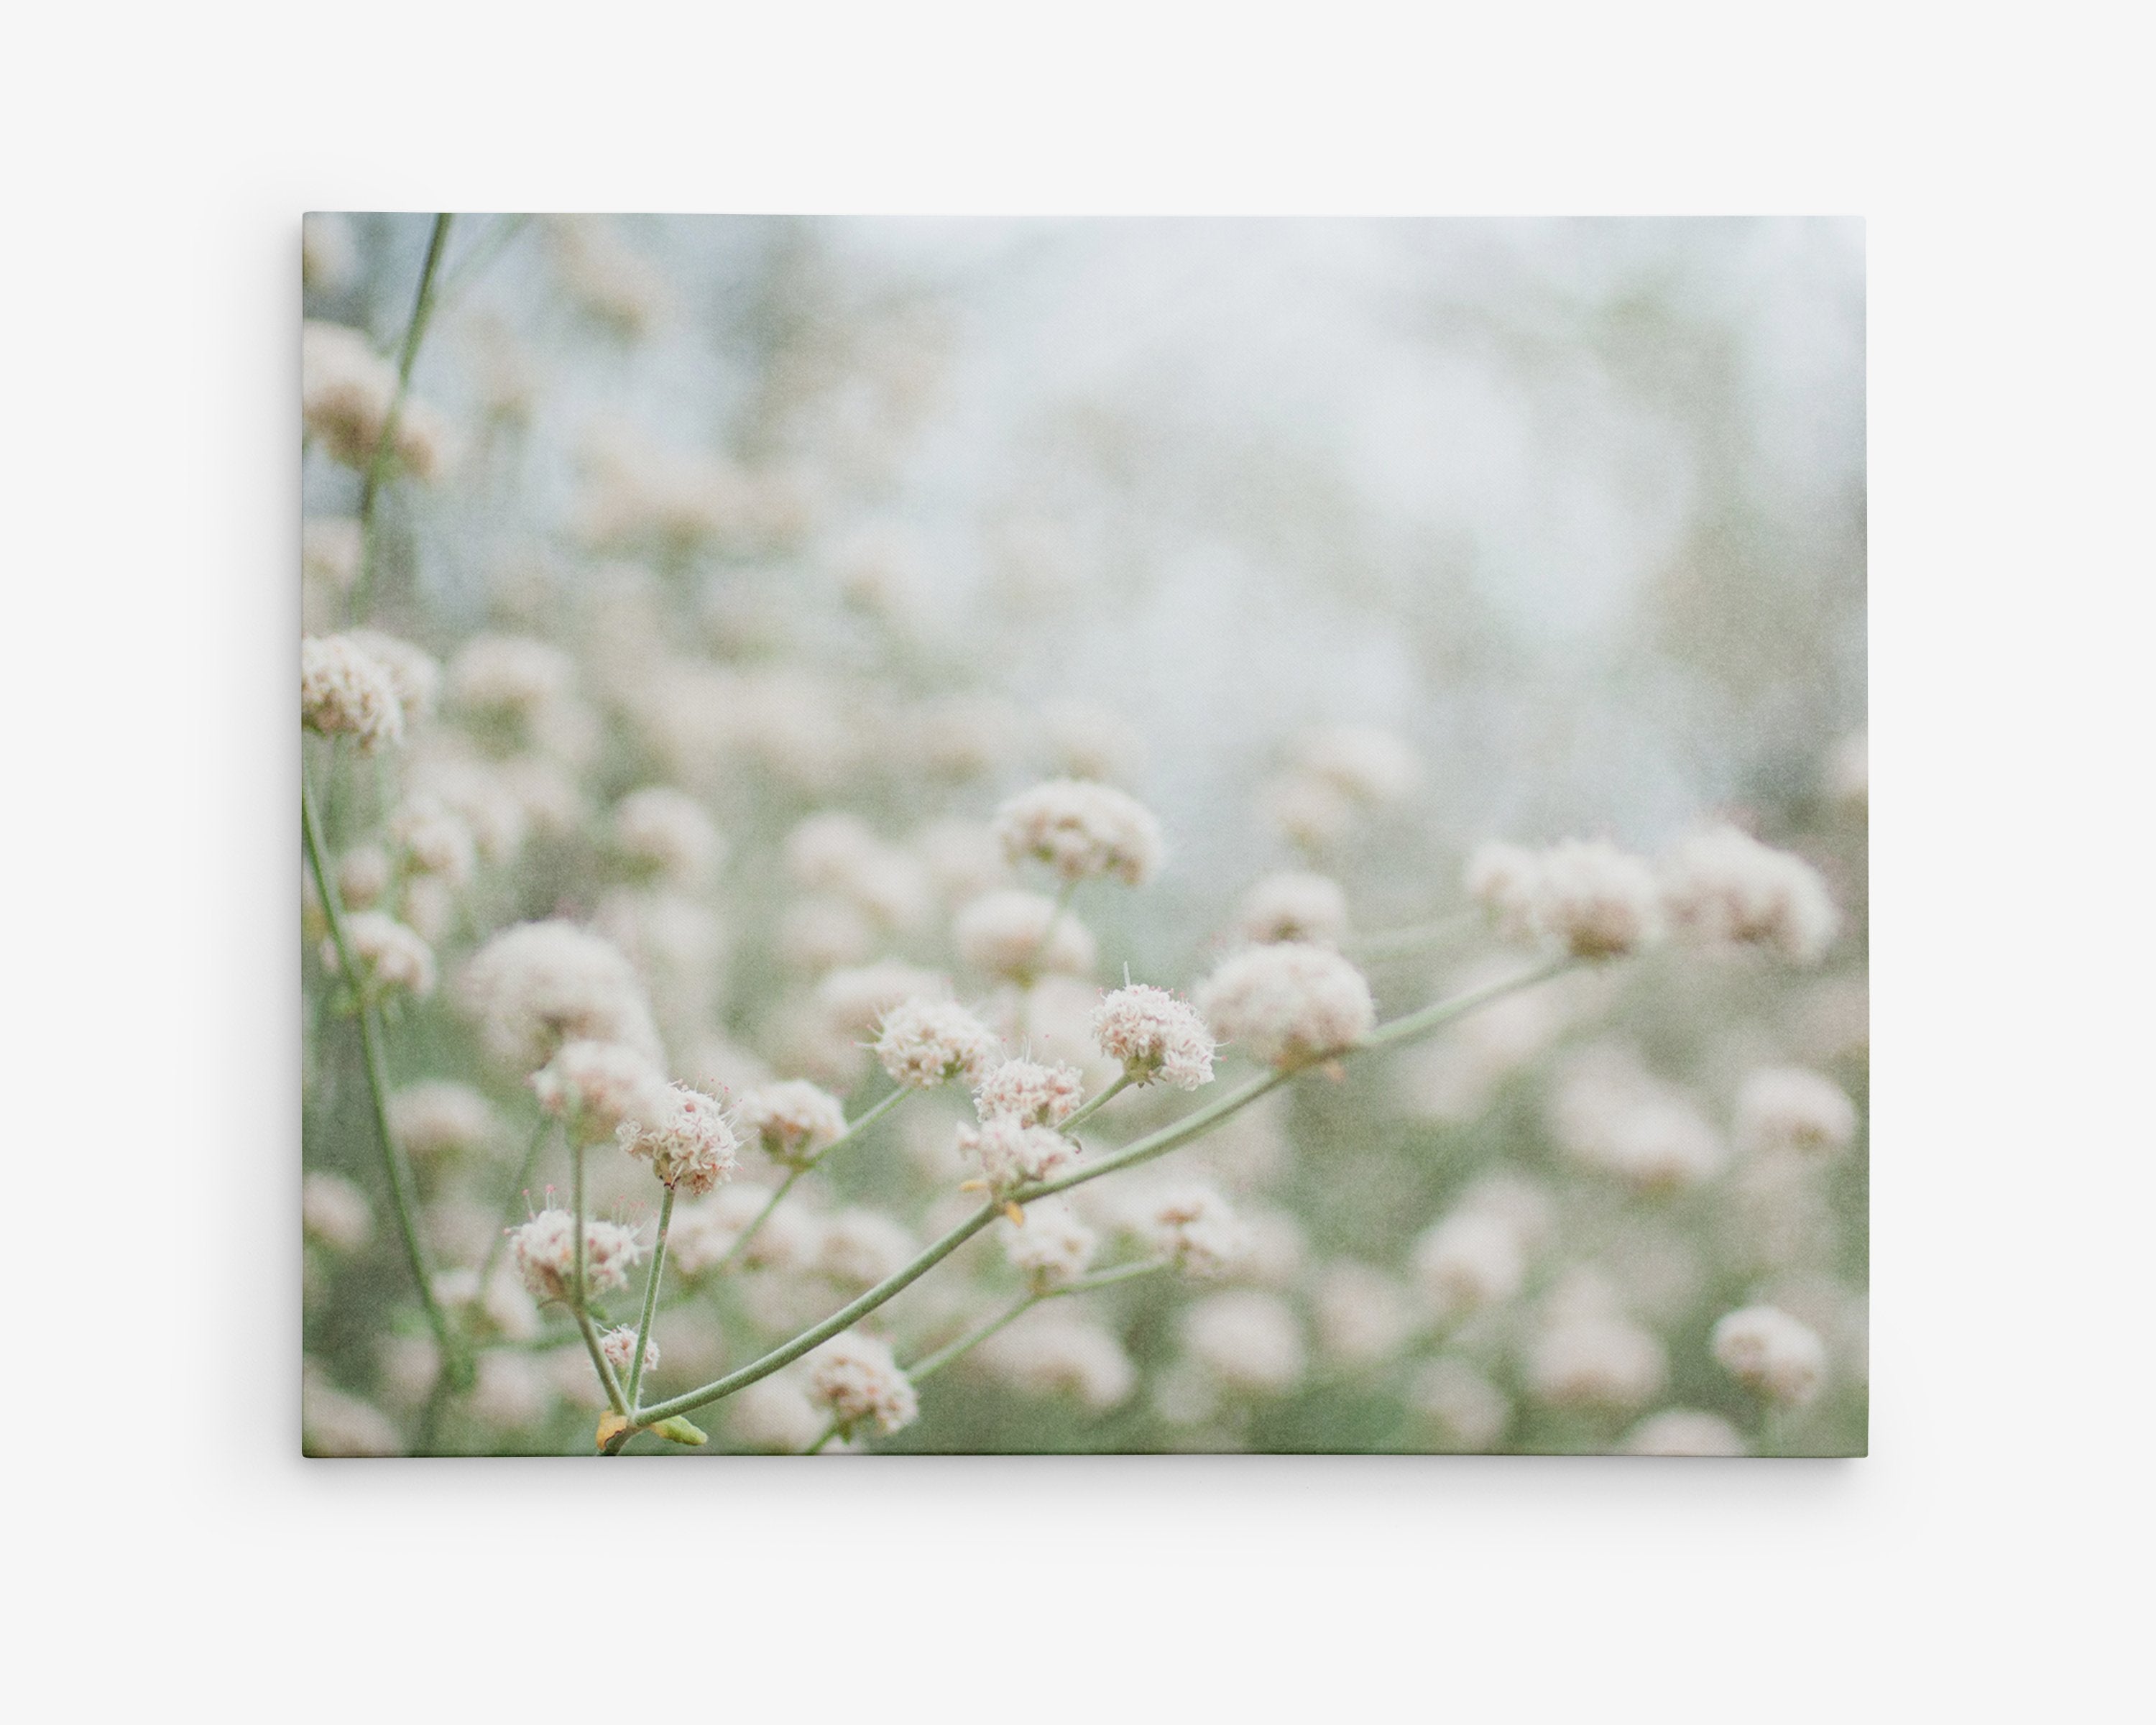 Rustic farmhouse decor in the form of a canvas print of flowering Buckwheat